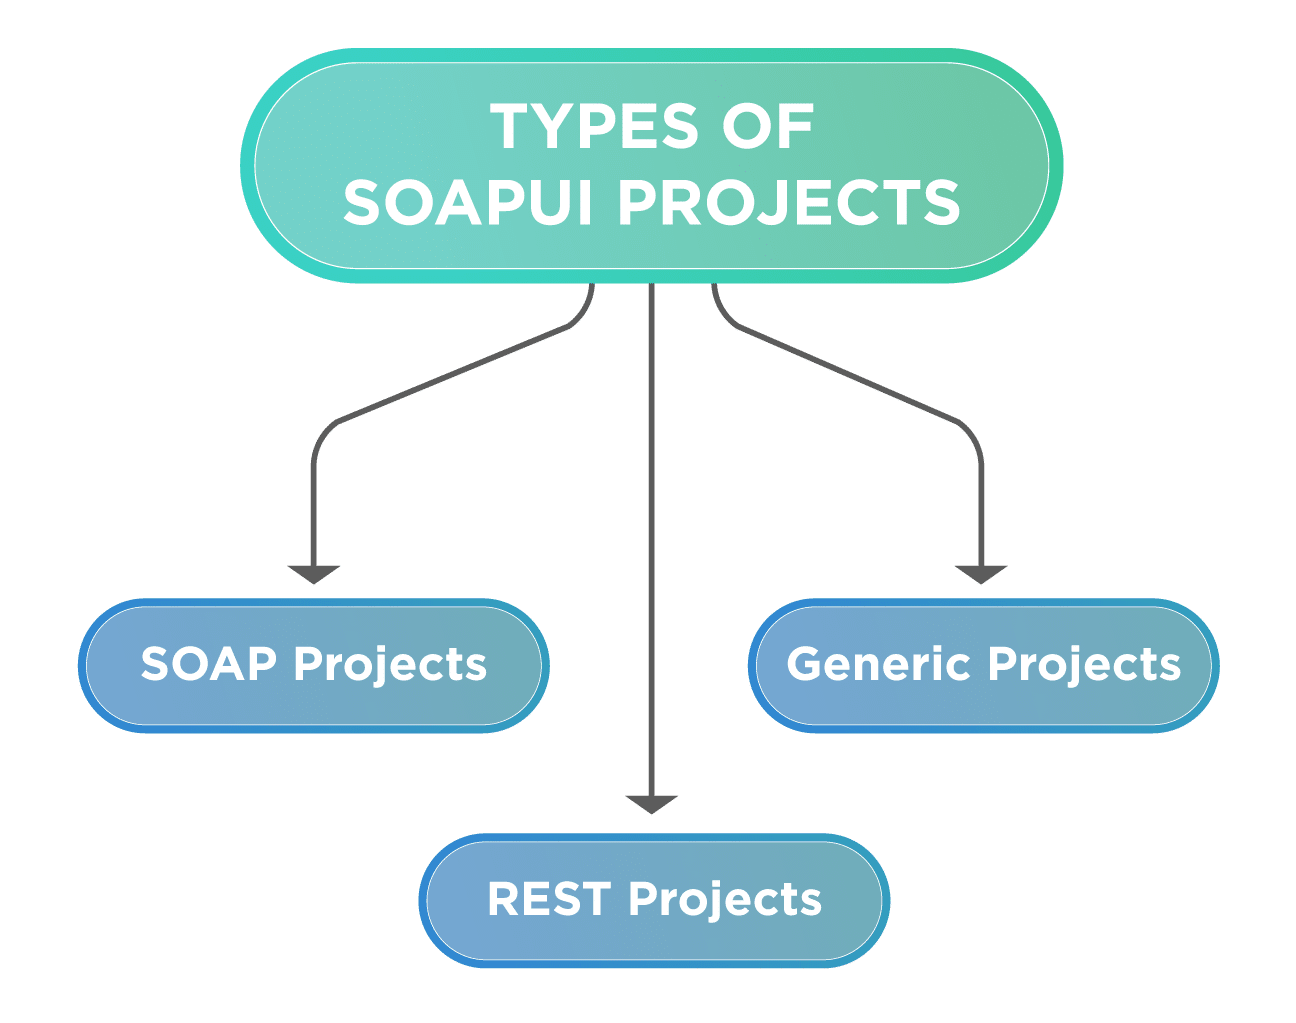 Type of projects in SoapUI